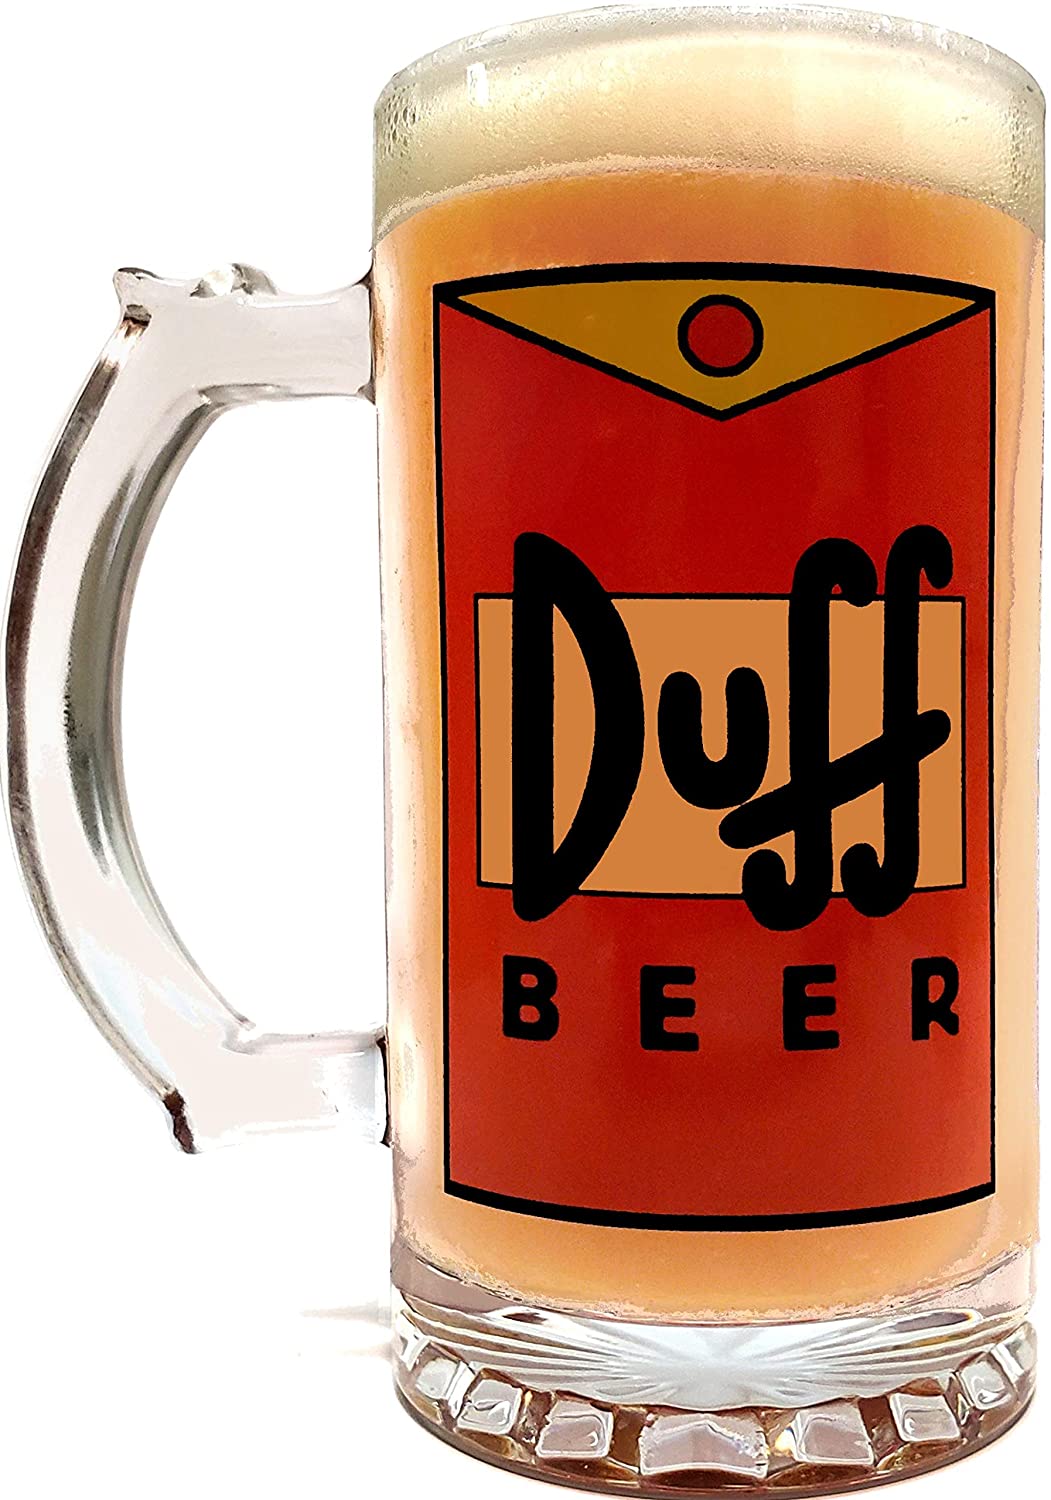 This Duff Beer Mug Could Be Yours! Click Here For Details